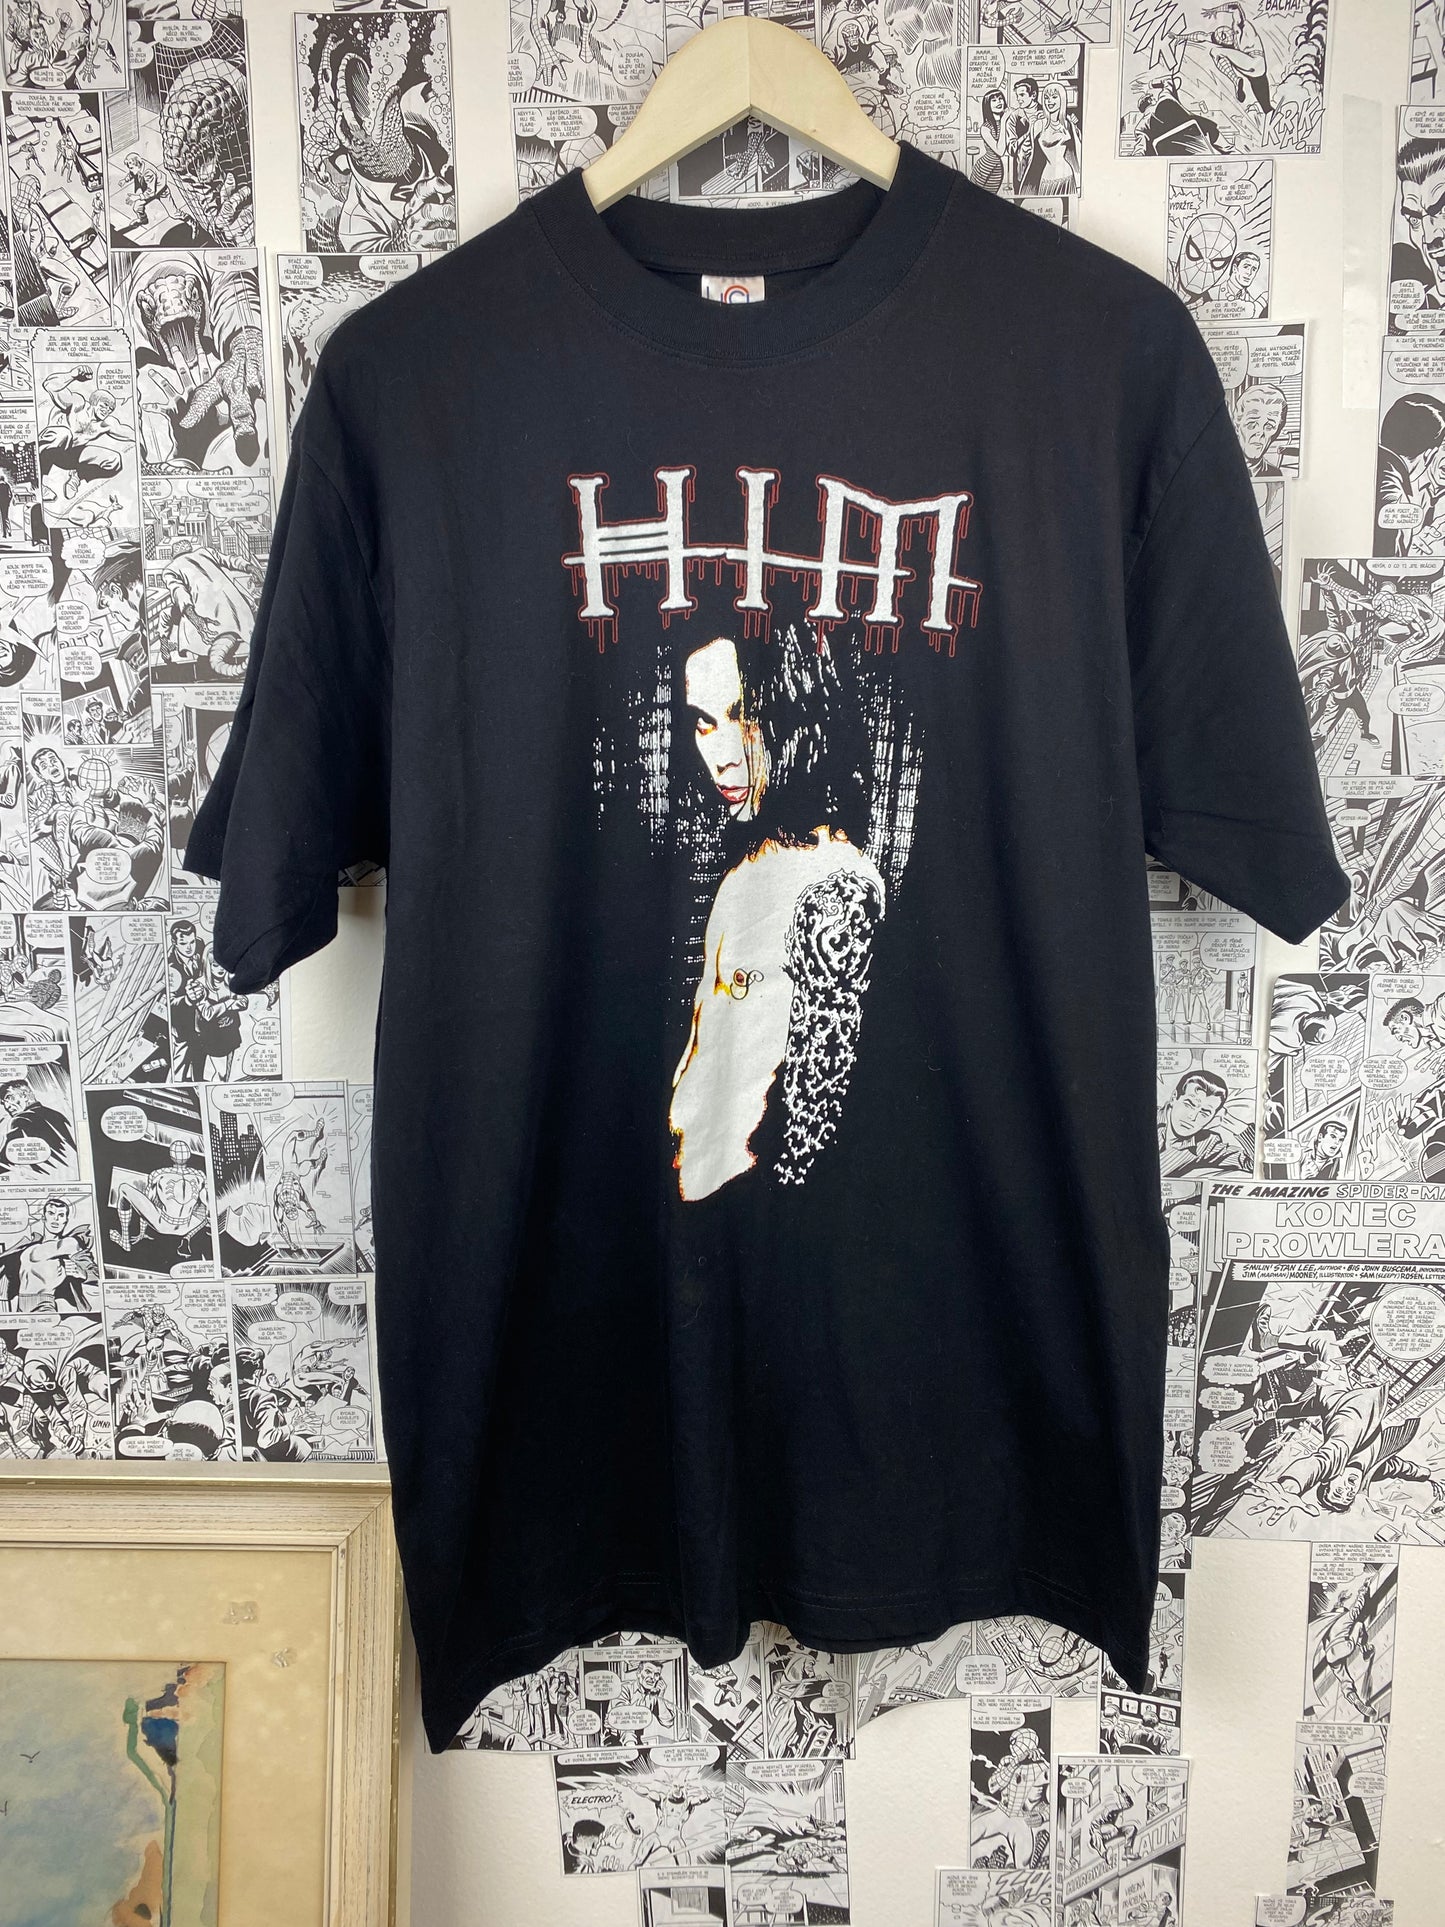 Copy of Vintage HIM “Wicked Game” t-shirt - size XL